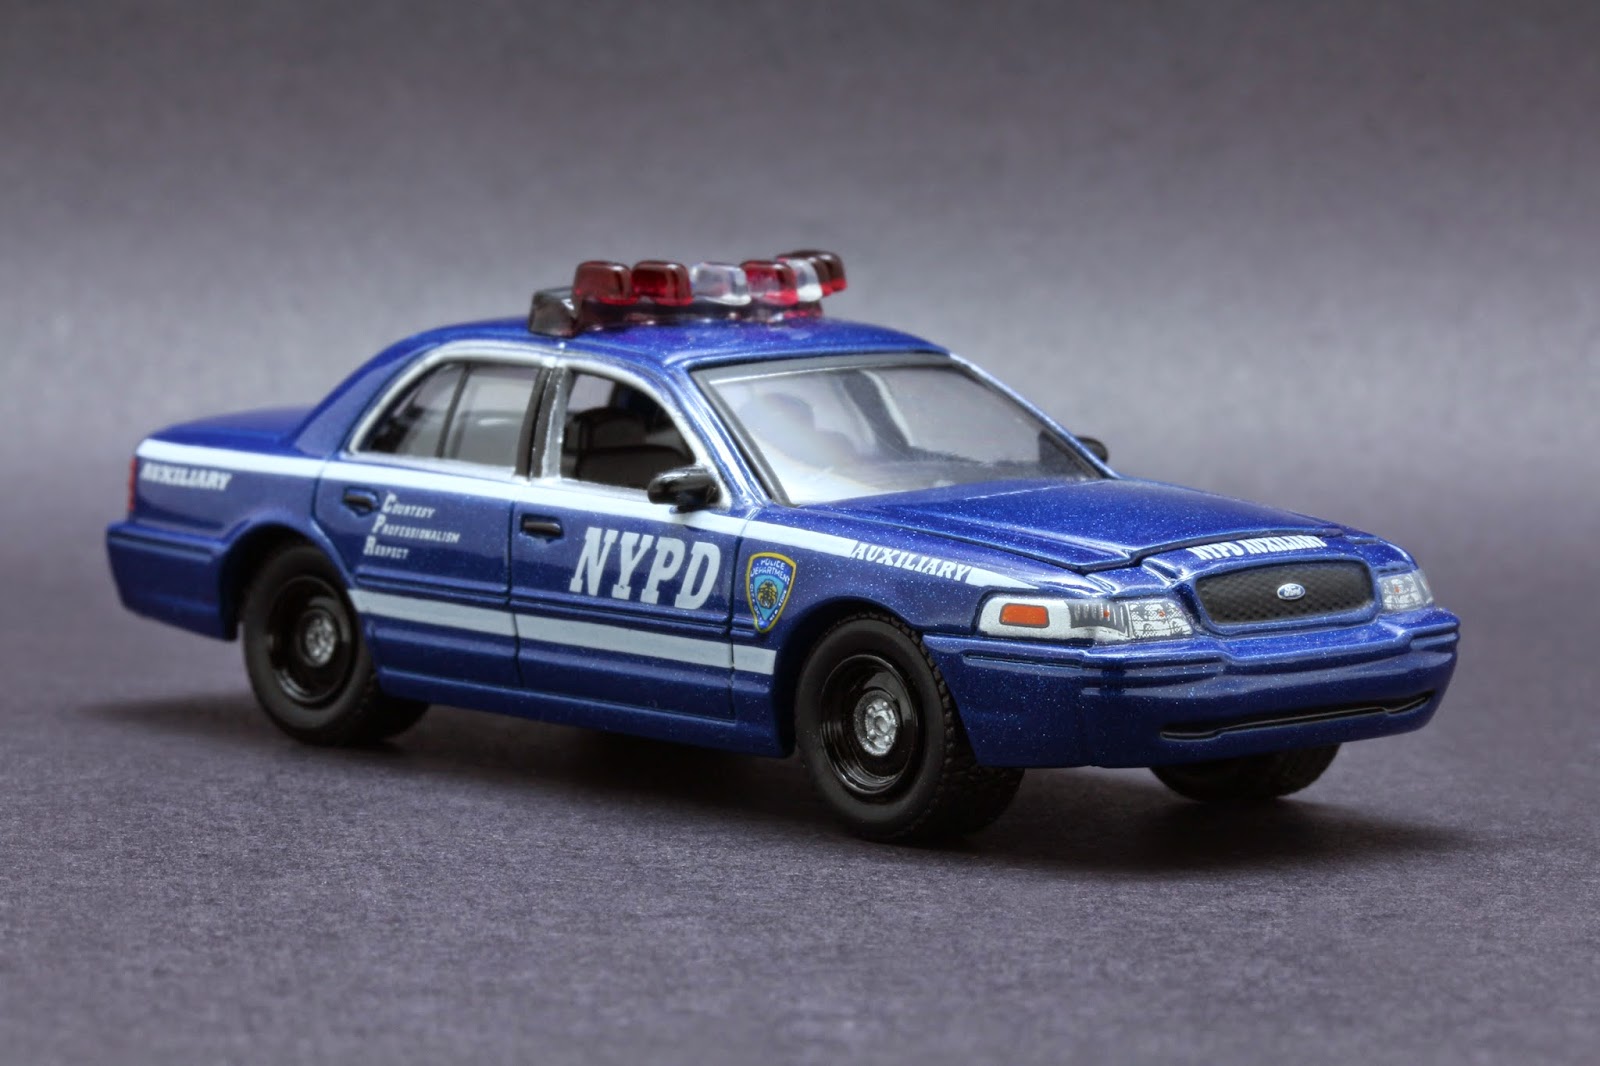 2010 Ford Crown Victoria - New York City Police Dept. 